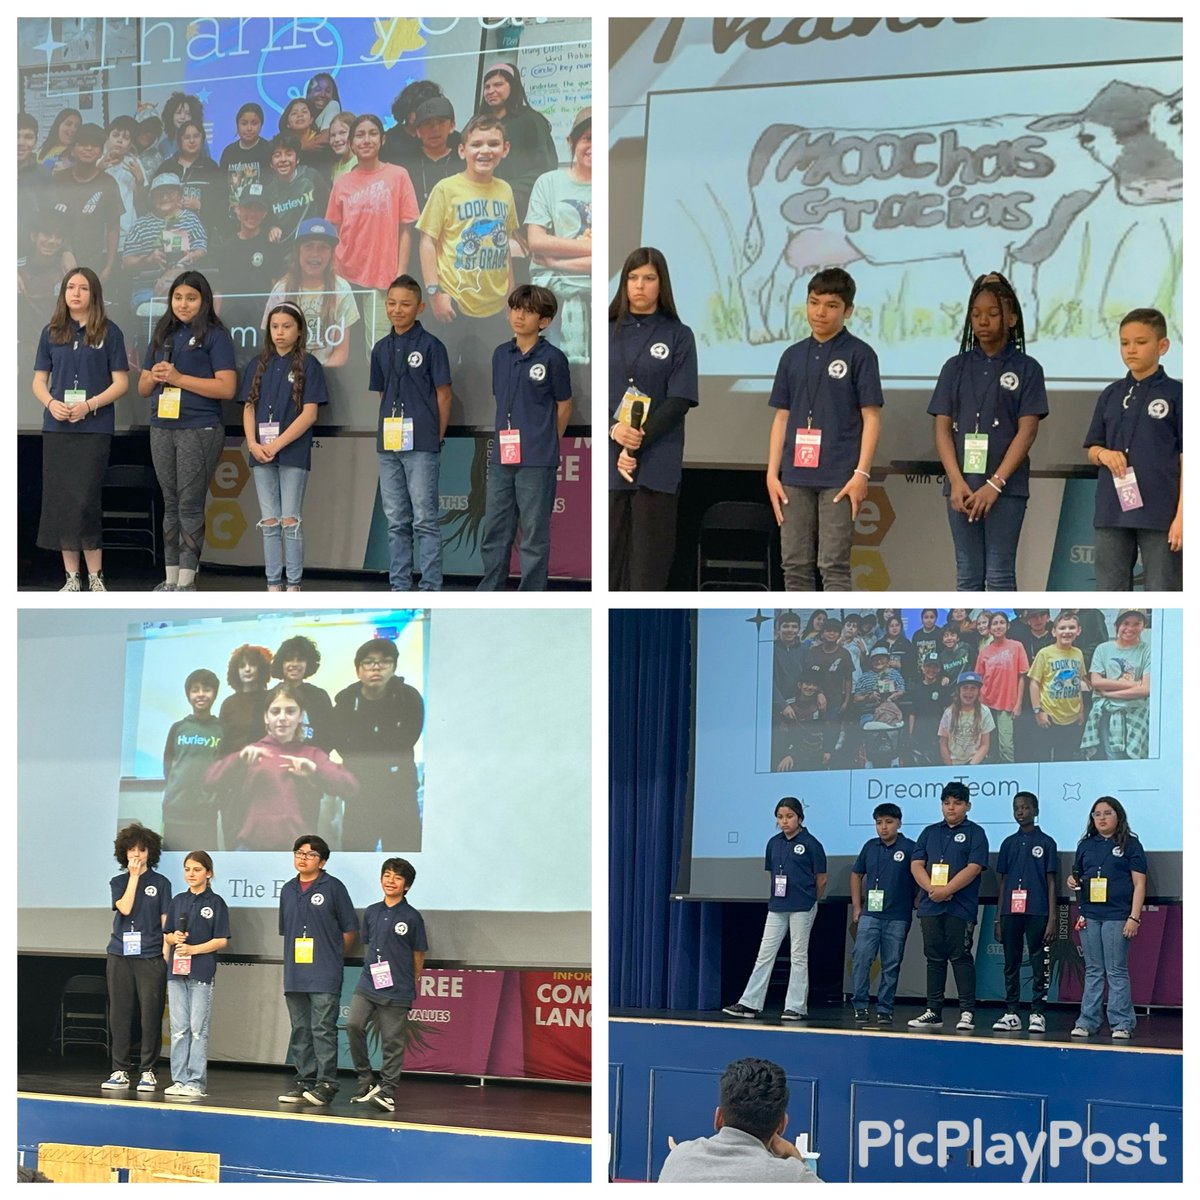 Demo Day @maestra_rekani 5/6 lobos did an amazing job with their @project_invent pitches. @BostoniaGlobal @CajonValleyUSD #somoslobos